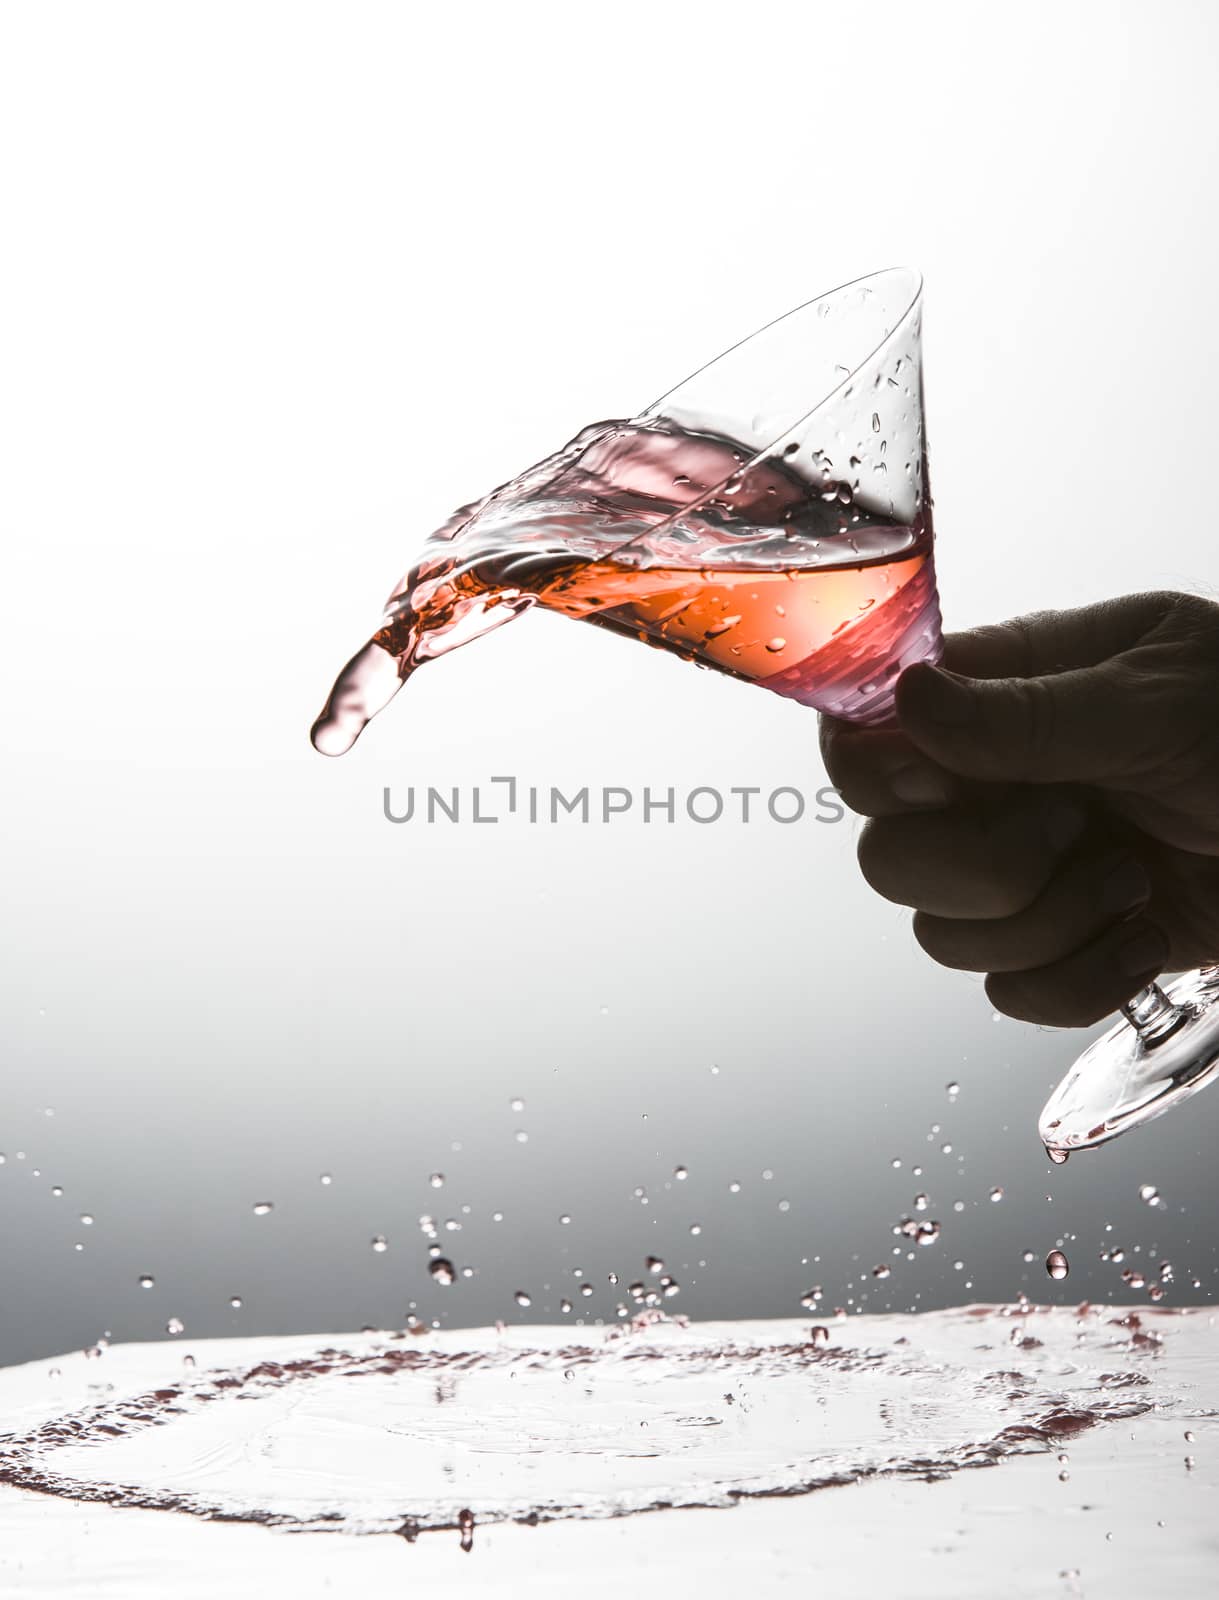 Cocktail being spilled out of a martini glass